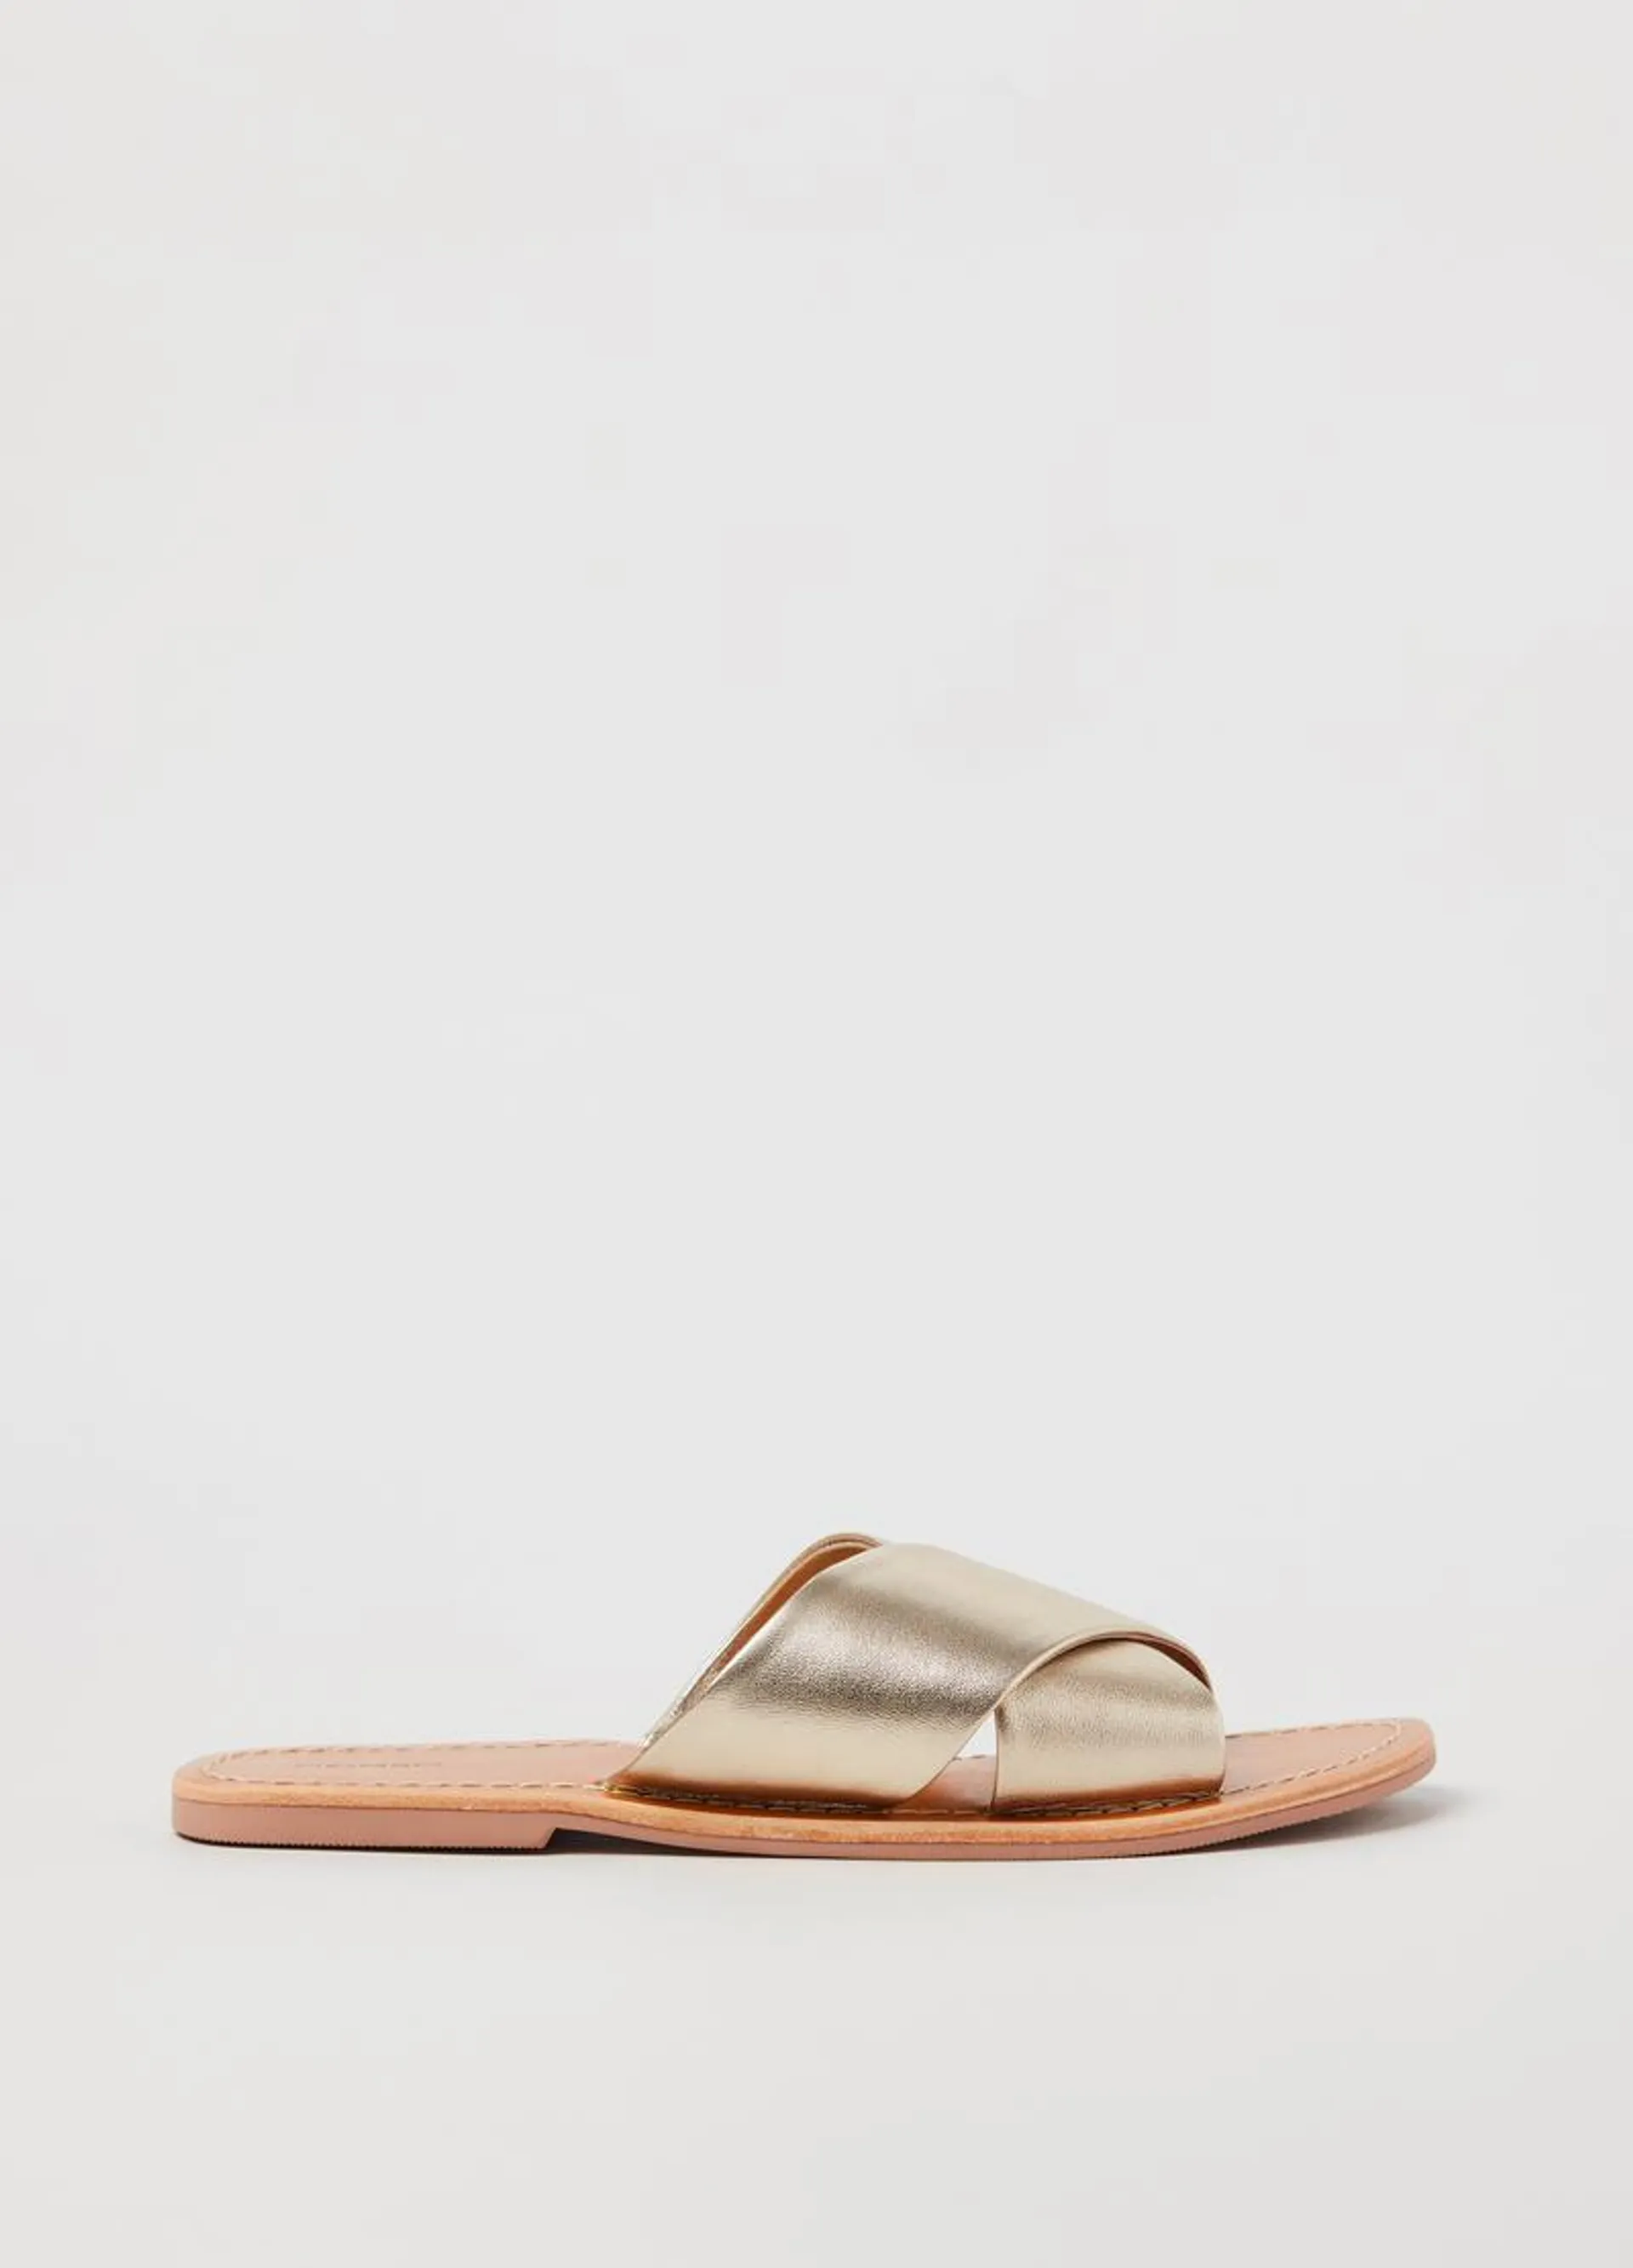 PIOMBO leather sandal with crossover bands